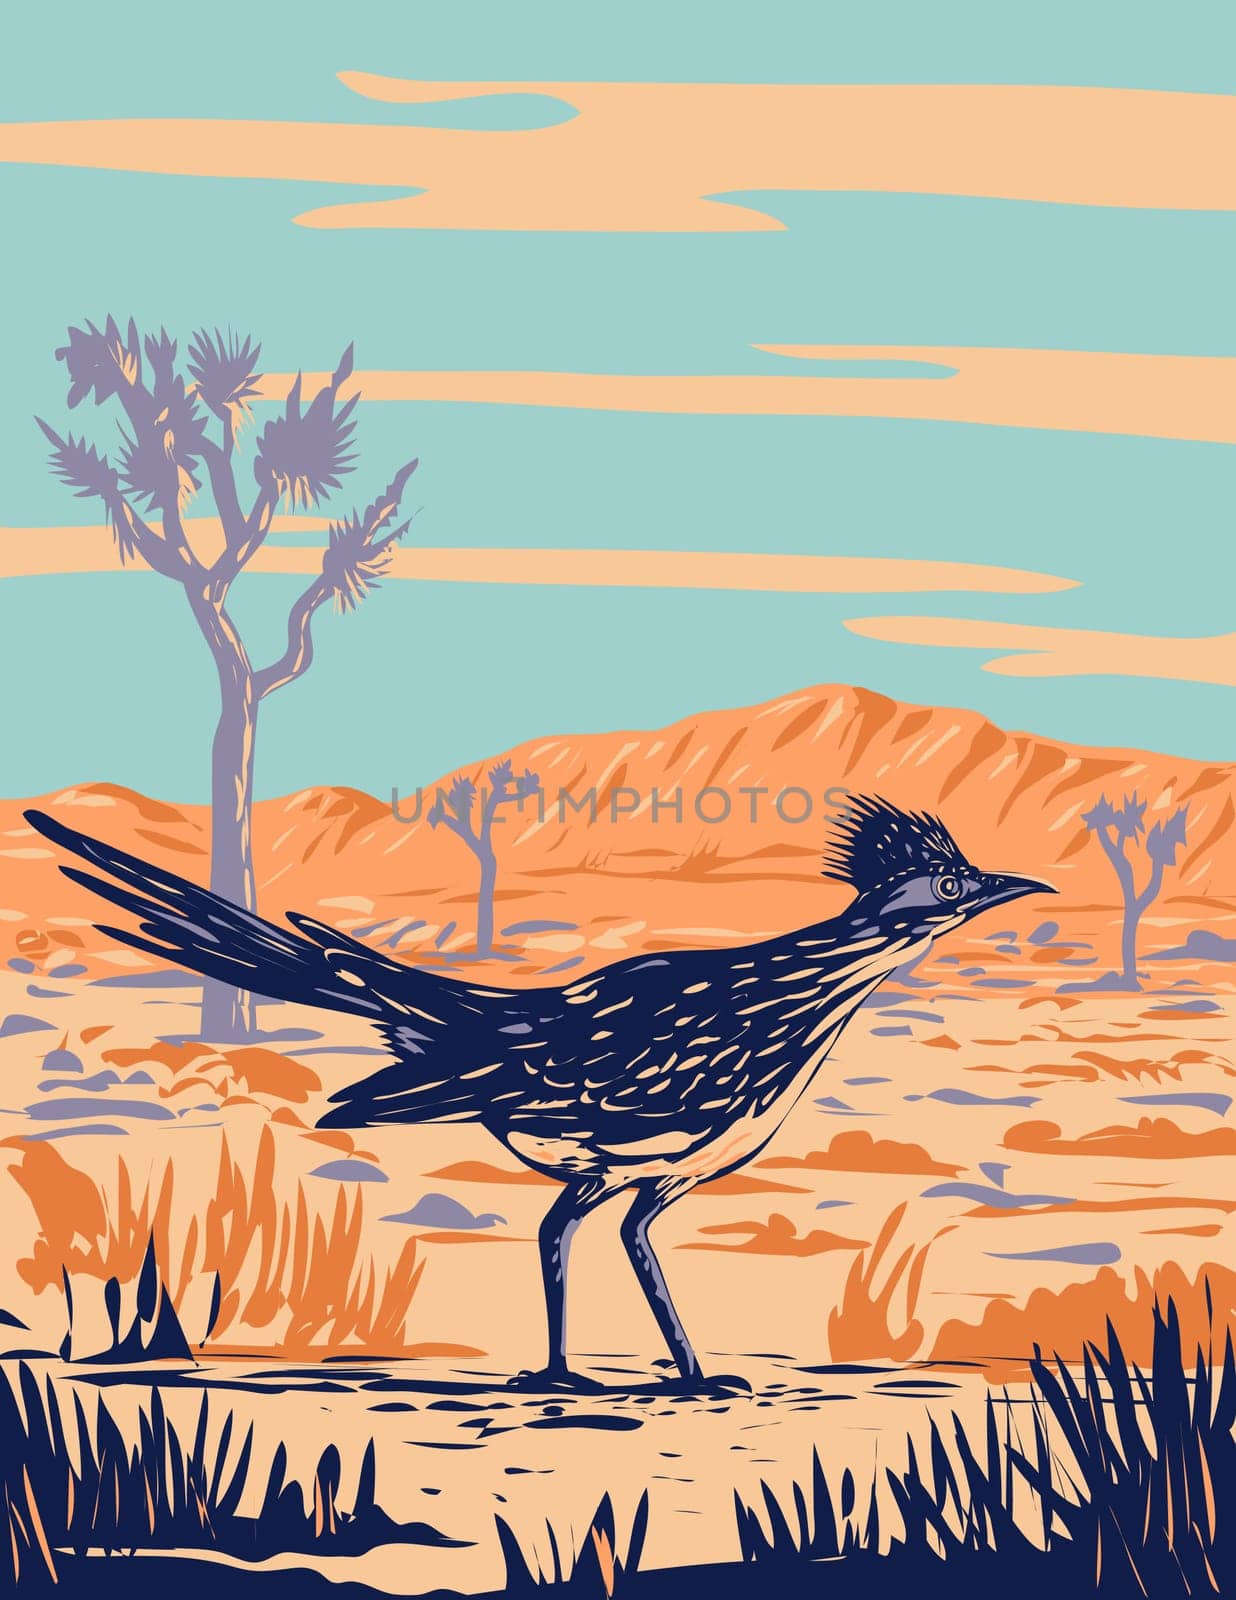 WPA poster art of a roadrunner, chaparral bird or chaparral cock in Joshua Tree National Park located in Mojave Desert, California done in works project administration or federal art project style.